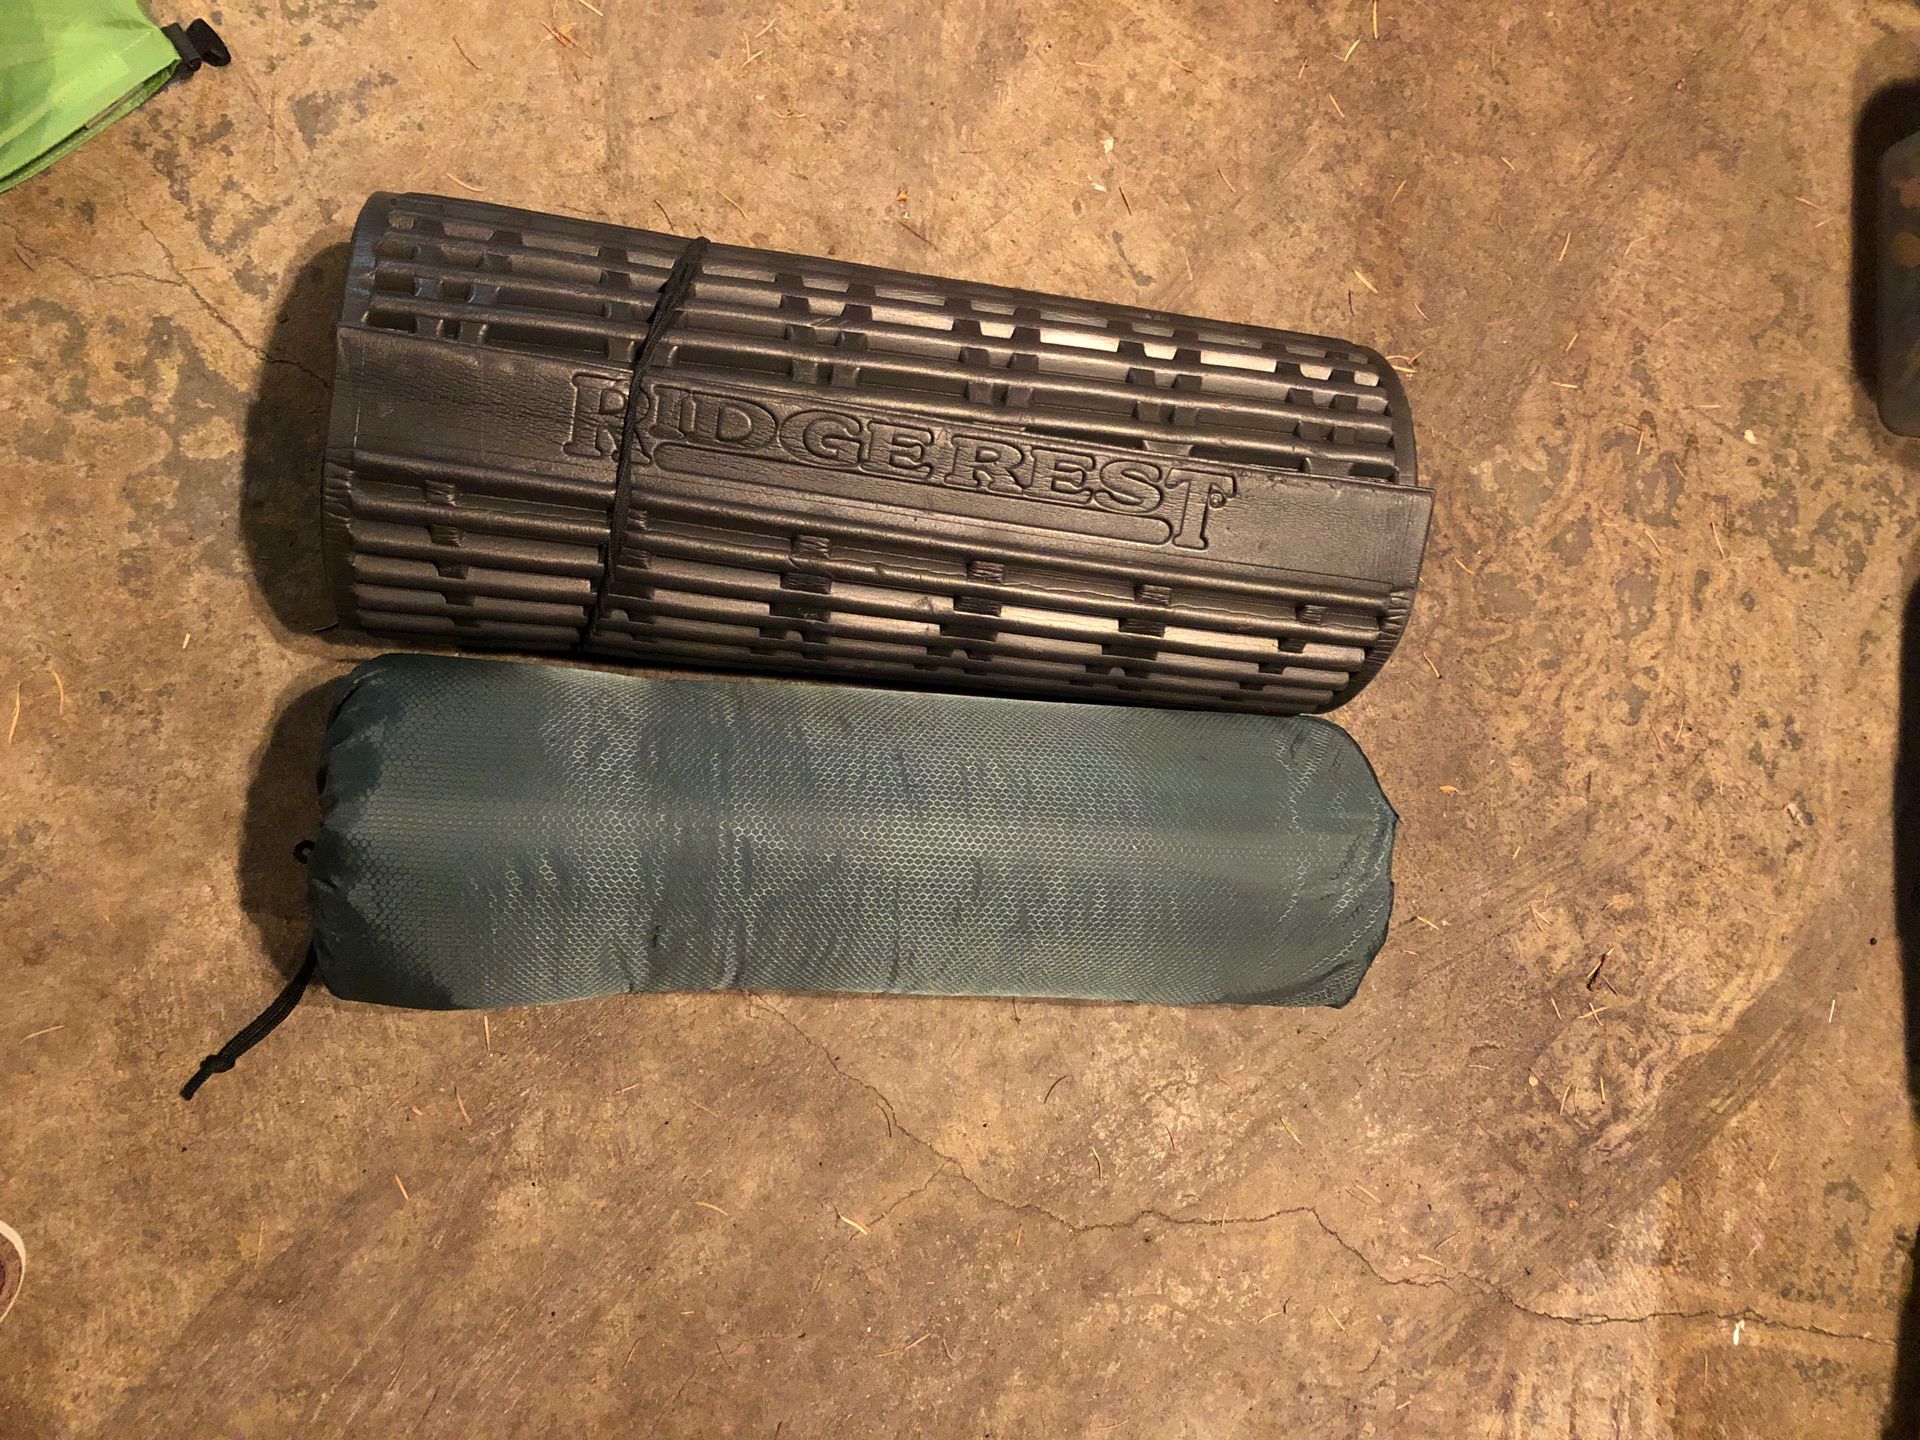 Sleeping Pads / One w/ cover & one without